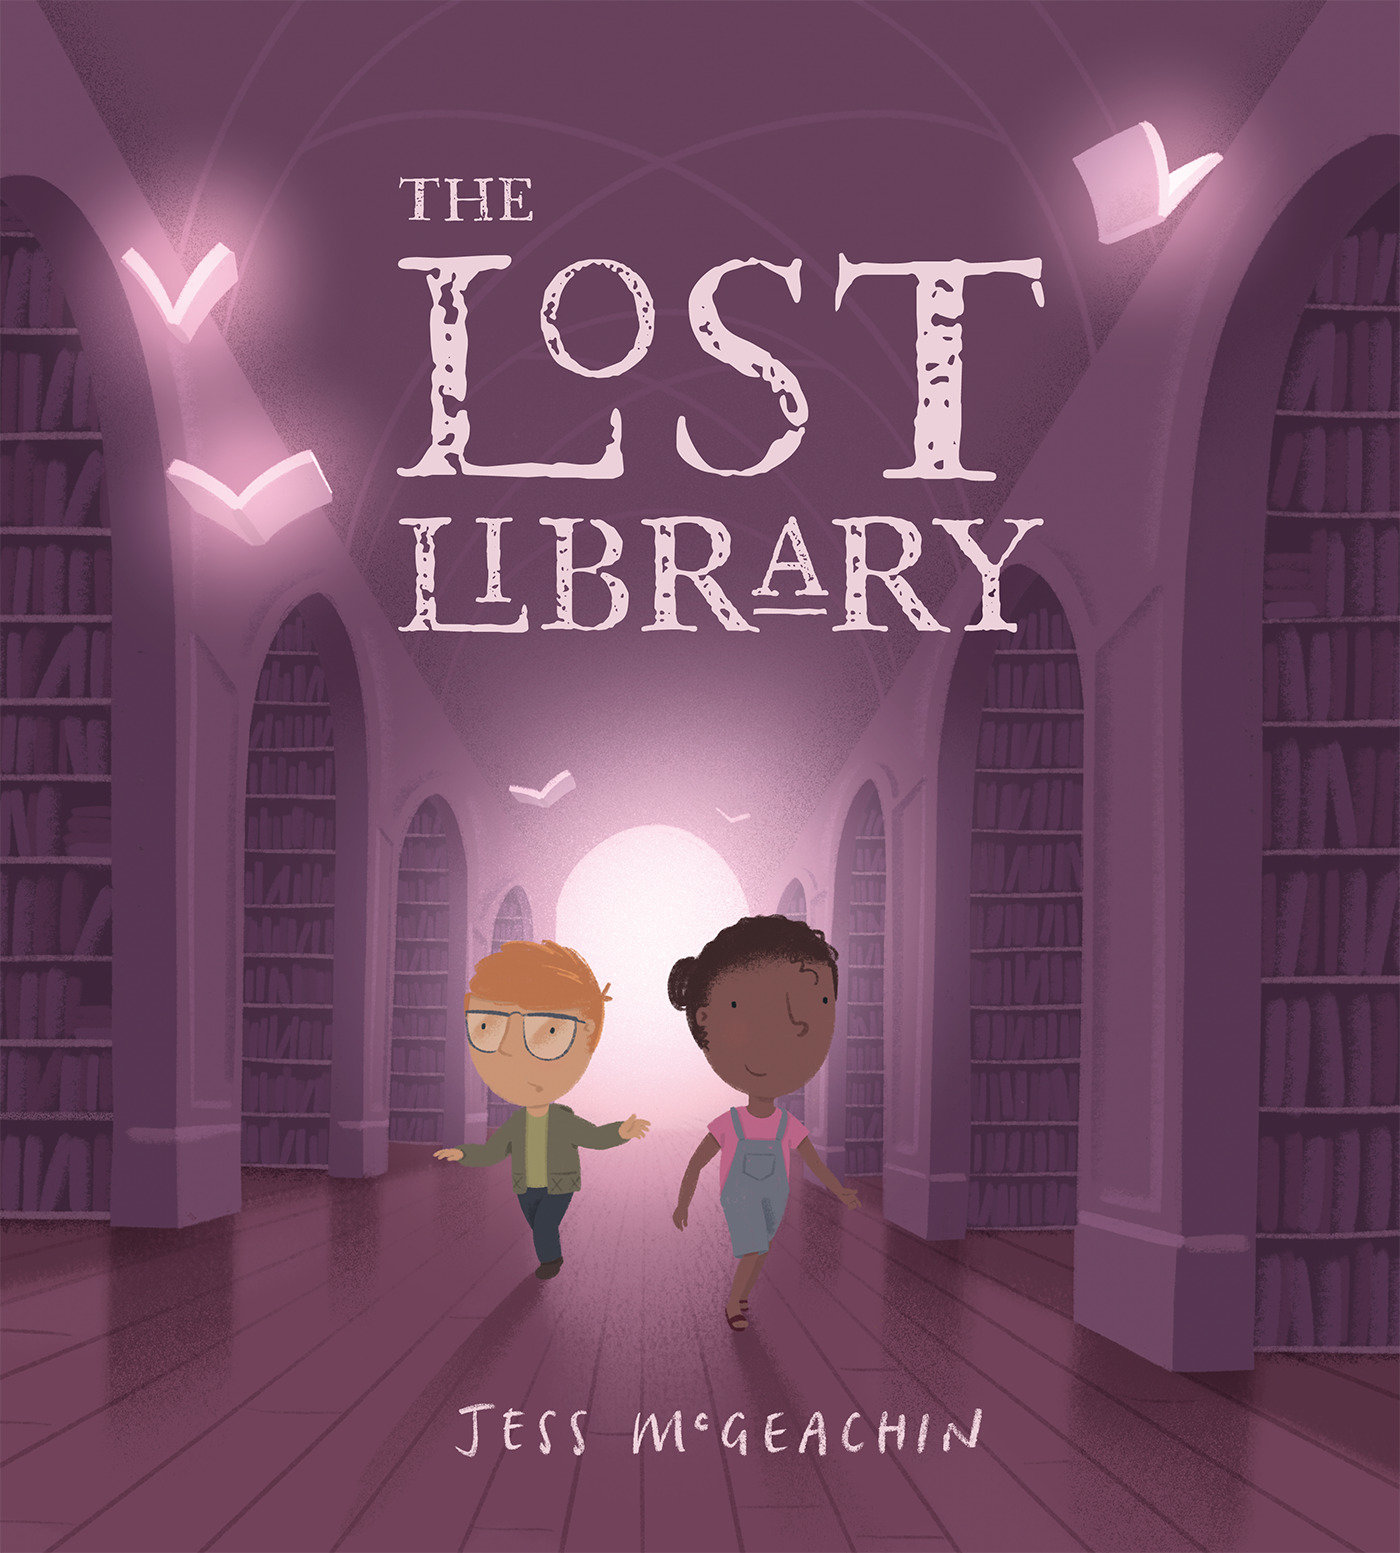 The Lost Library (Hardcover Book)